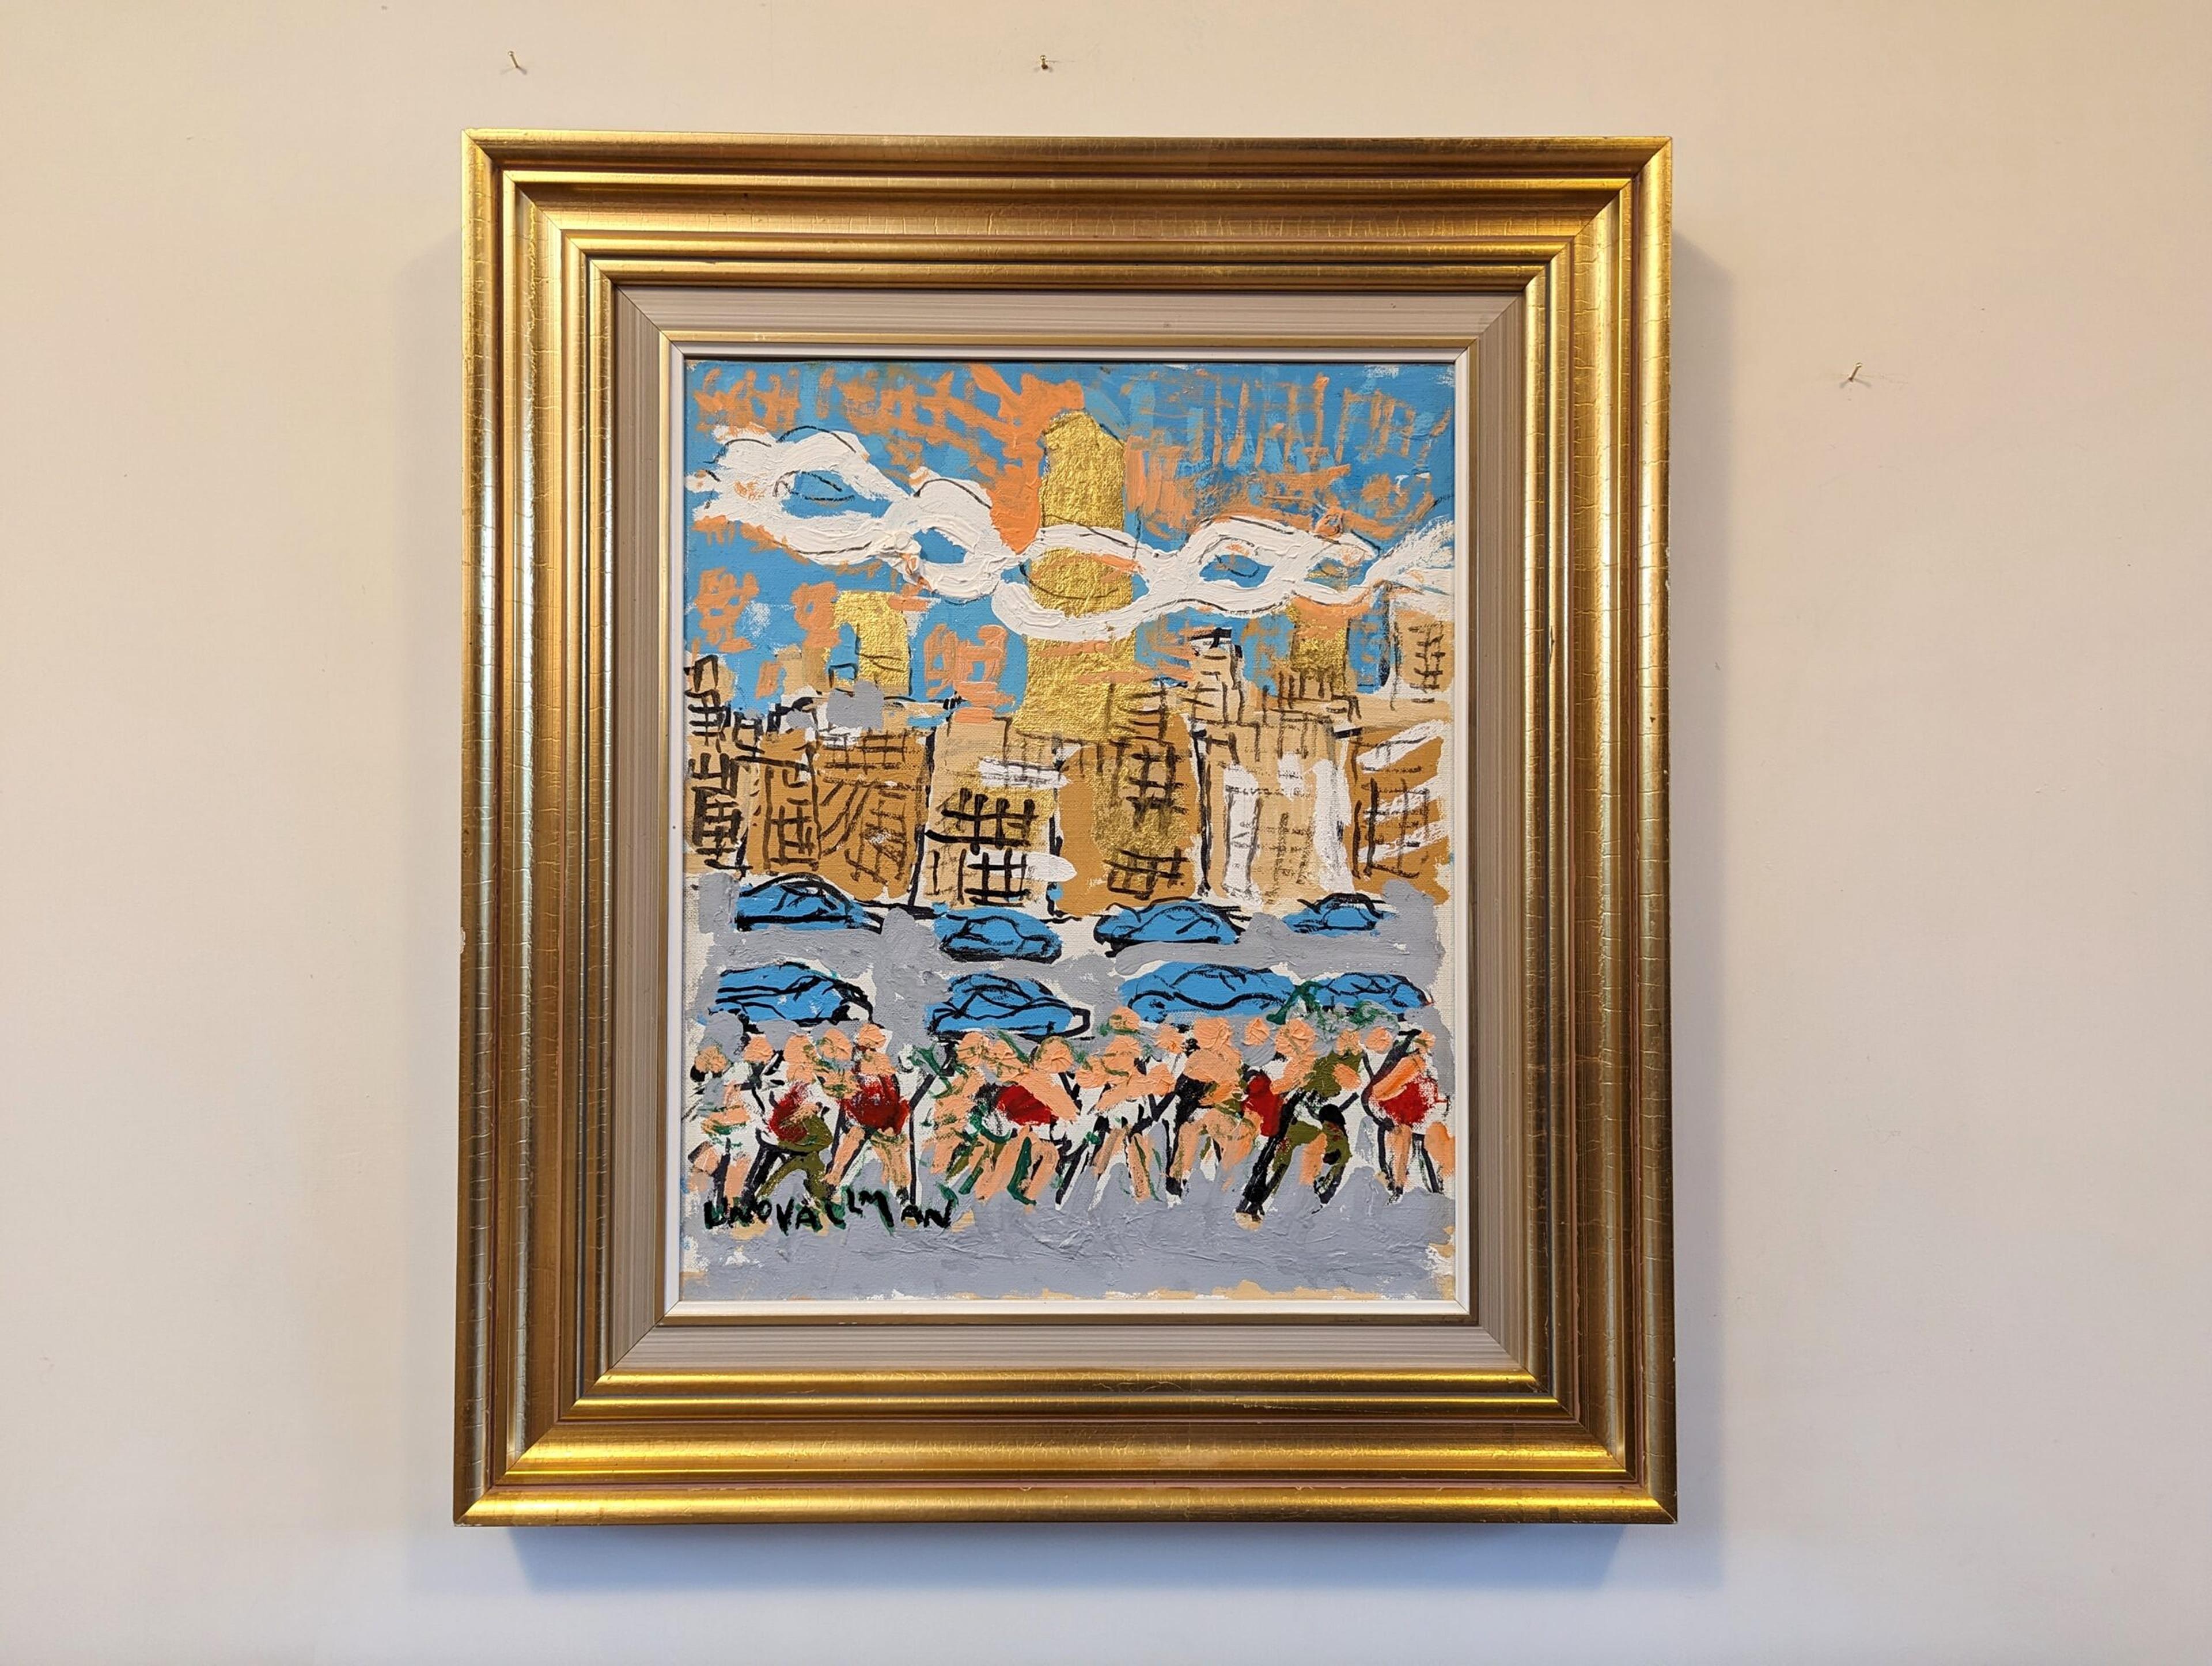 CITY TOUR
Size: 64.5 x 56 cm (including frame)
Oil on Canvas

A lively and energetic city street scene composition, executed in oil onto canvas and dated 1998 by Swedish artist Uno Vallman (1913-2004) whose works are included in the Swedish National